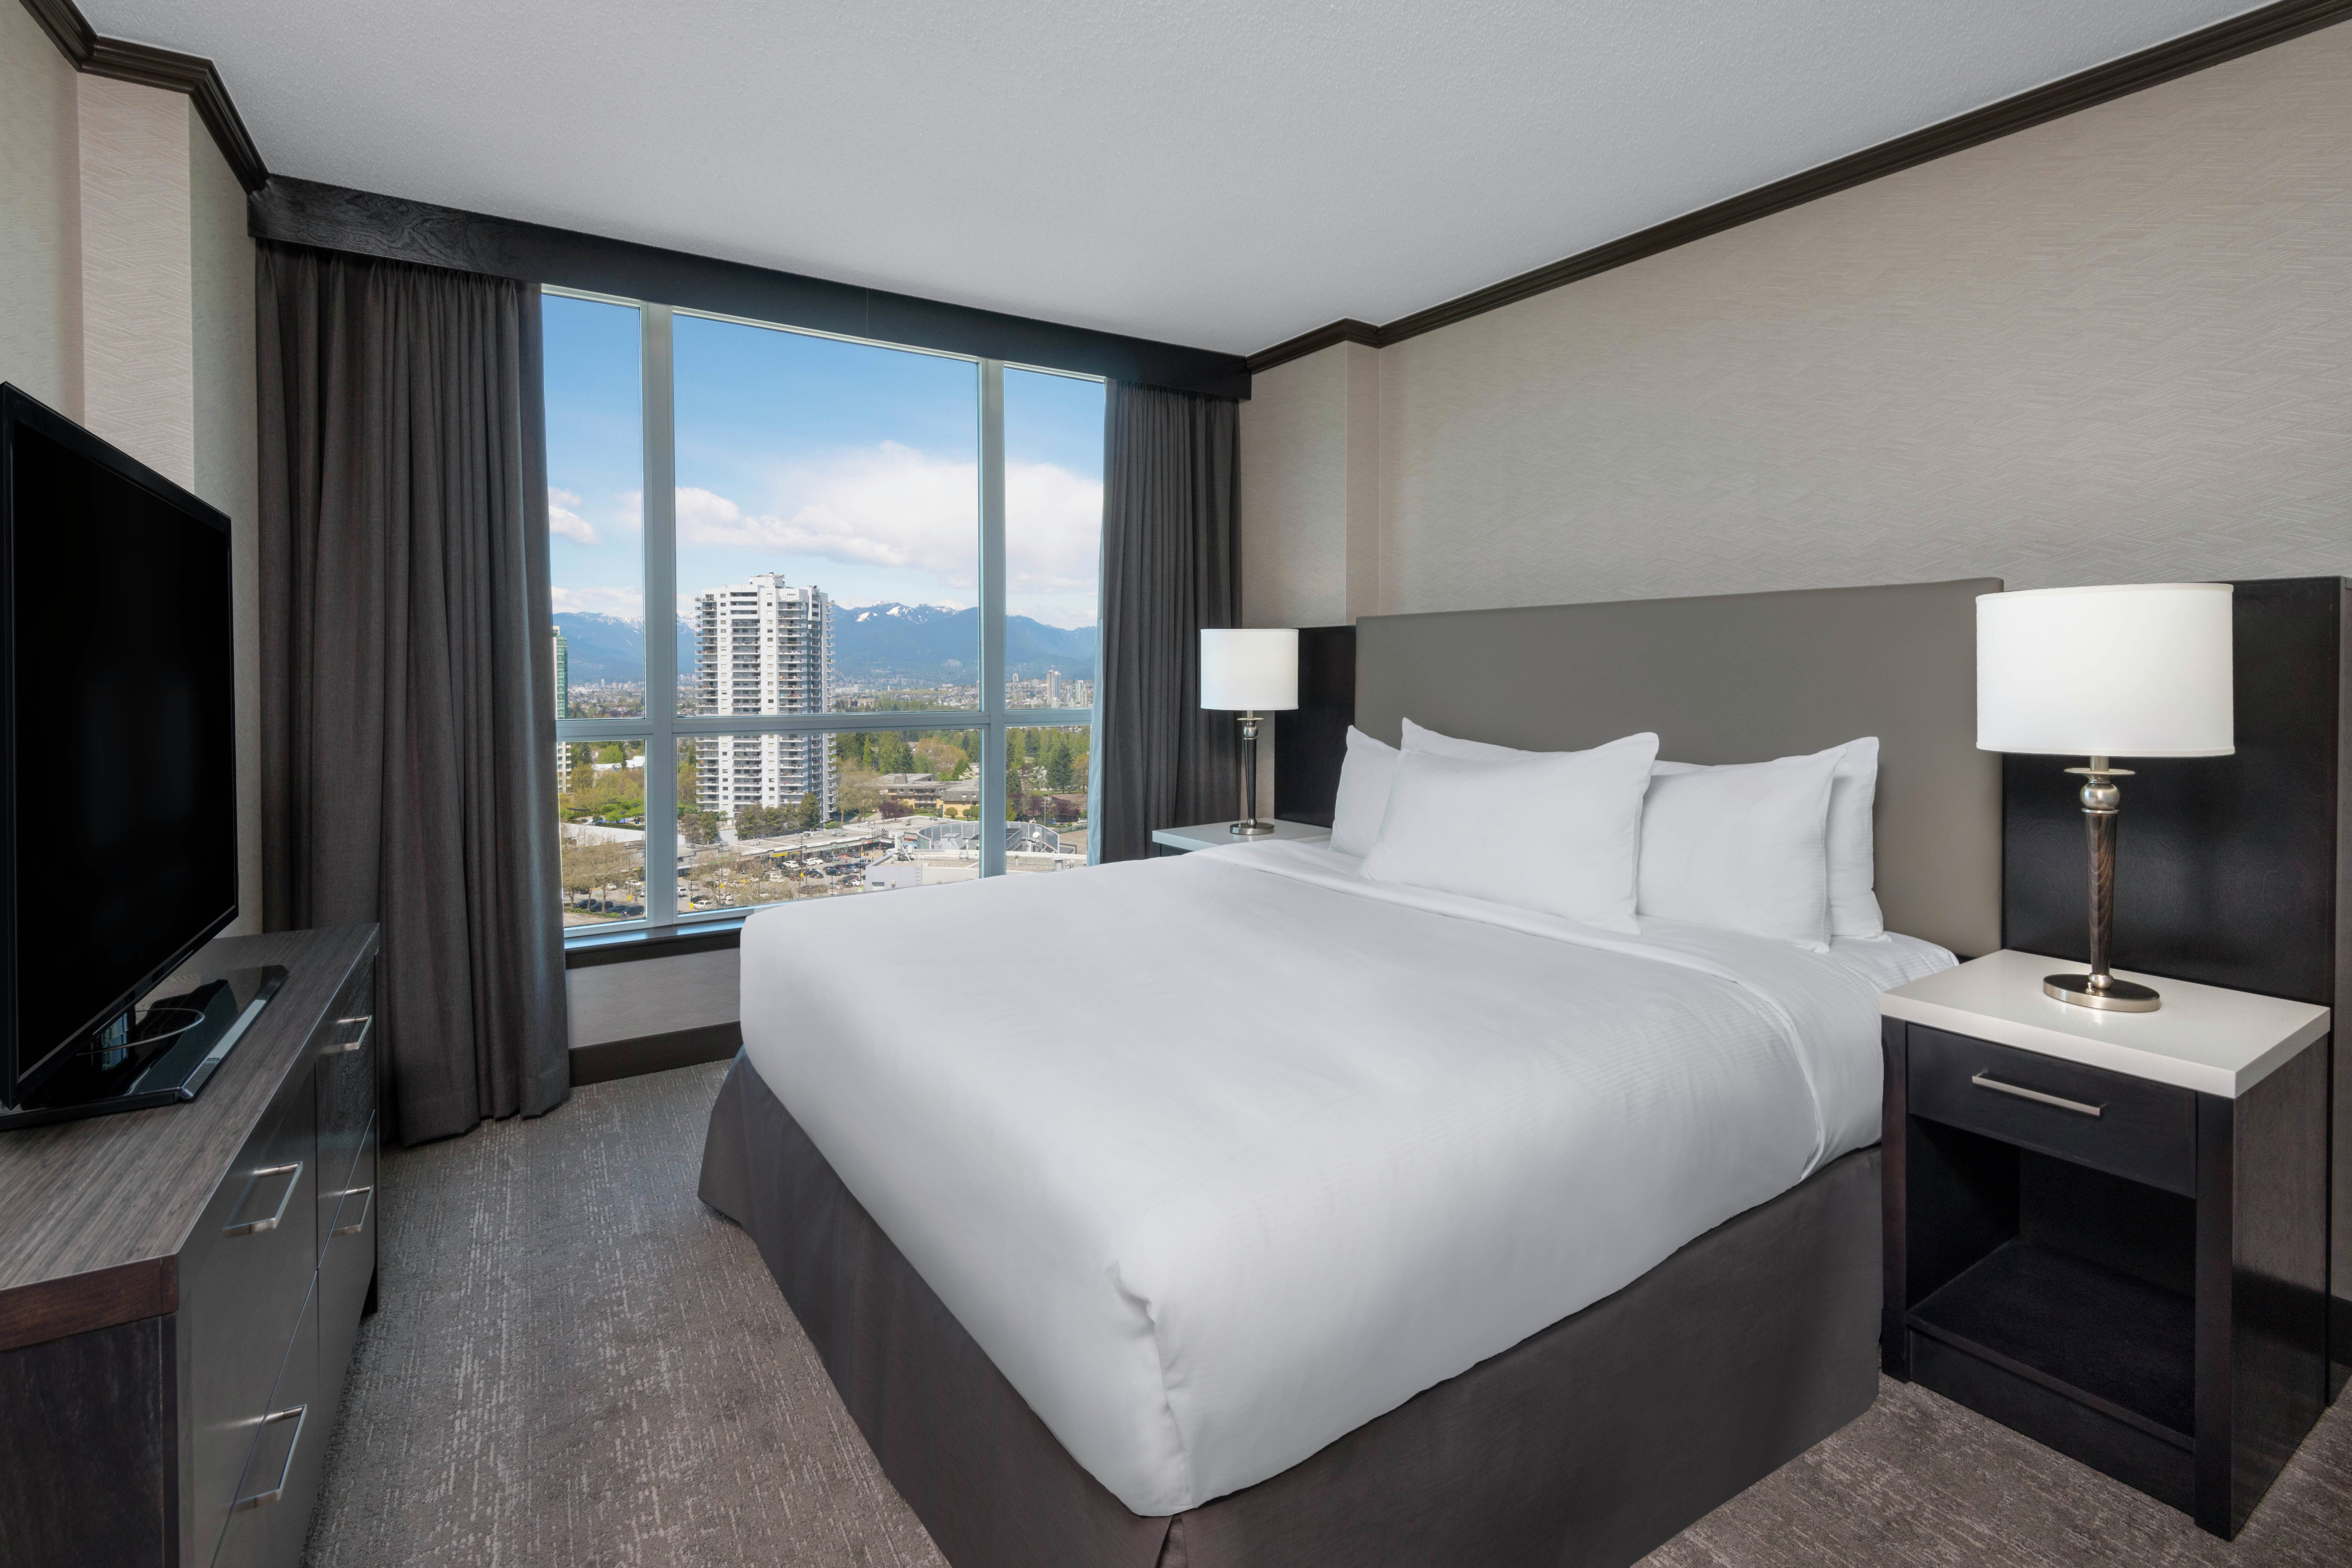 Guest Room with a King sized Bed HDTV and City View